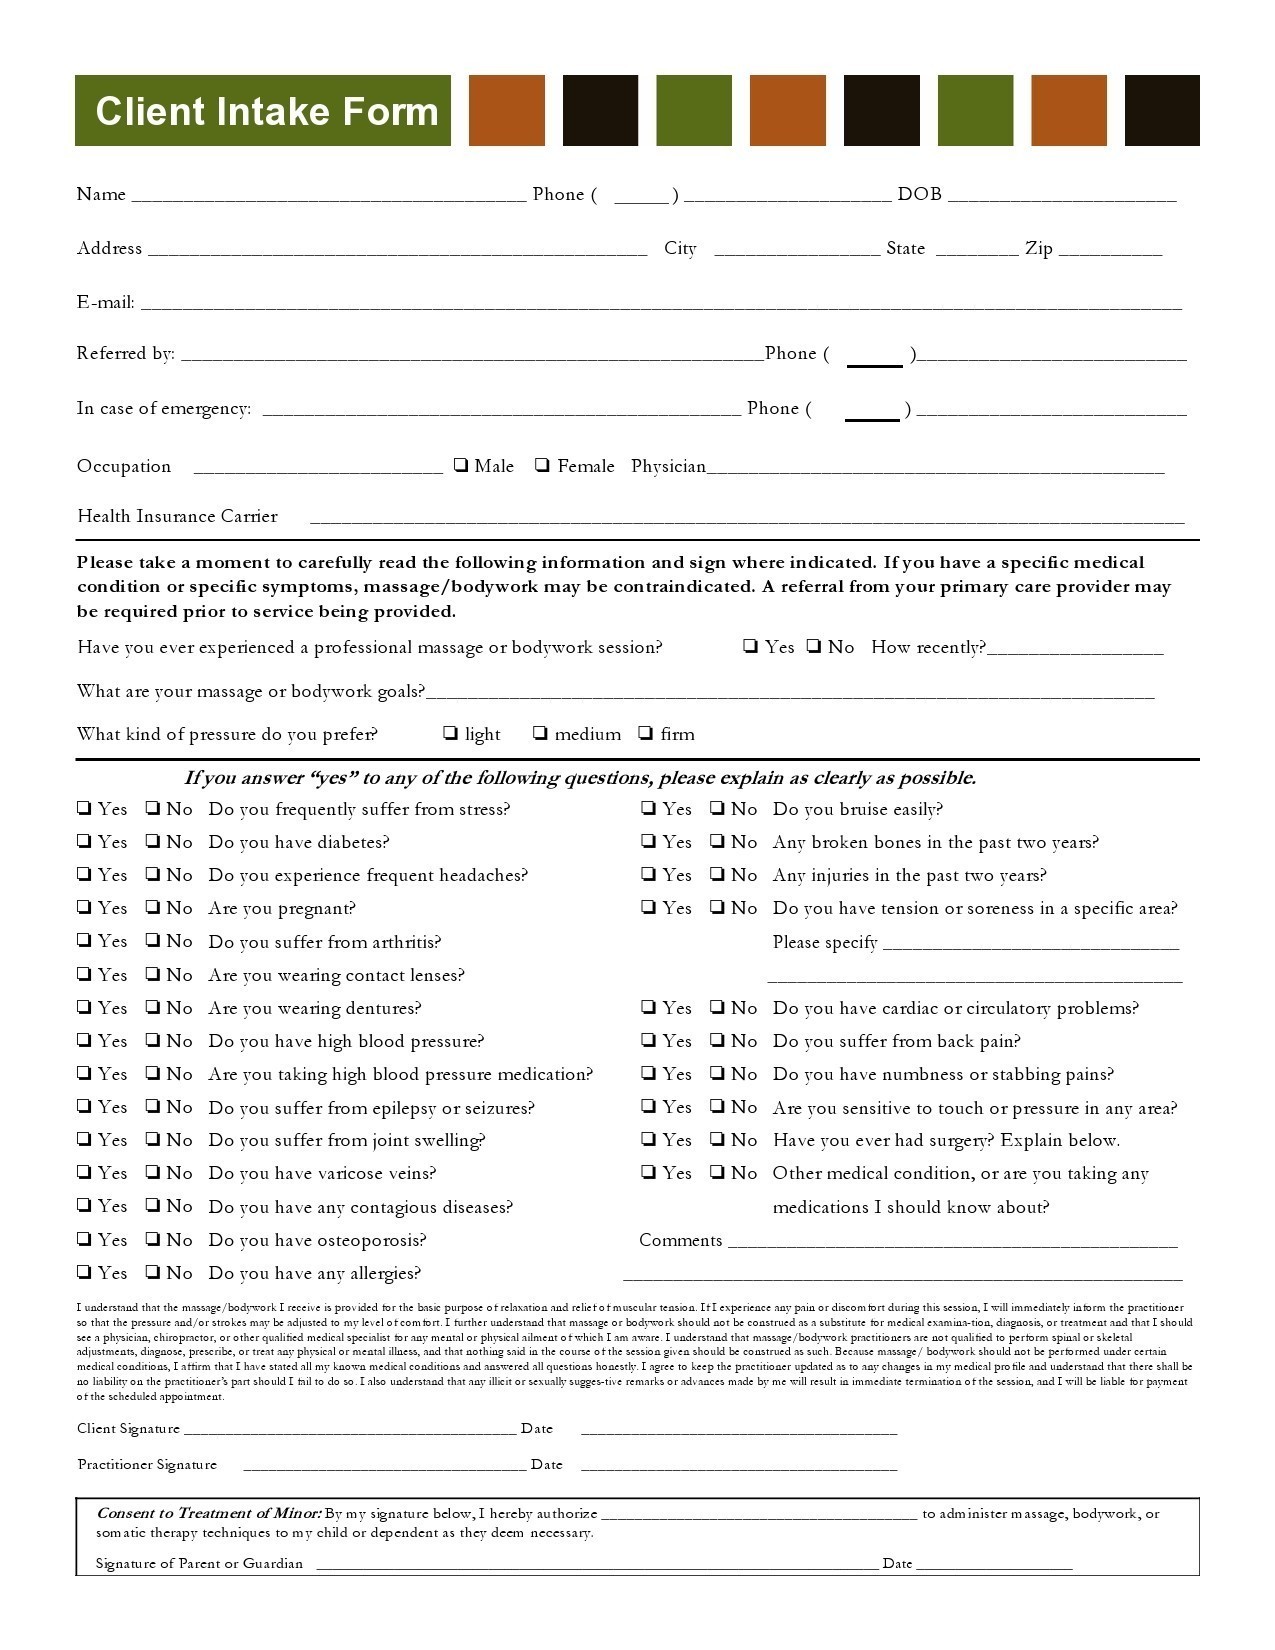 Free client intake form 40